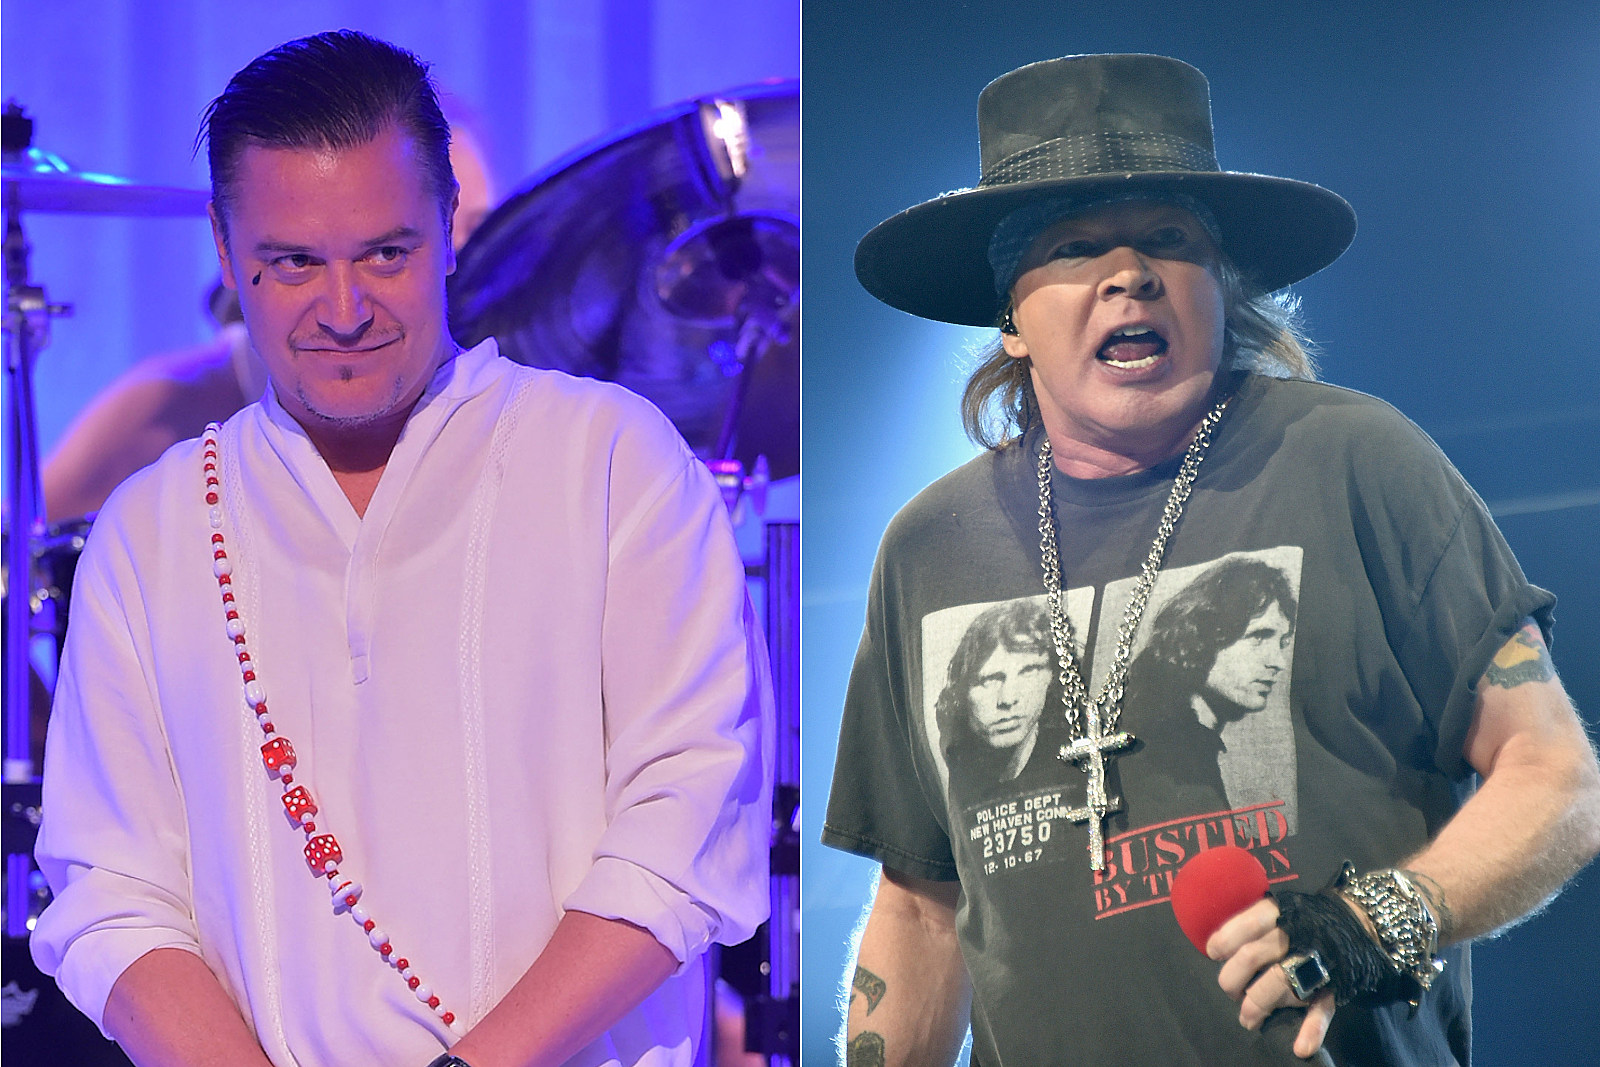 Mike Patton Explains Why He Peed on Axl Rose's Teleprompter